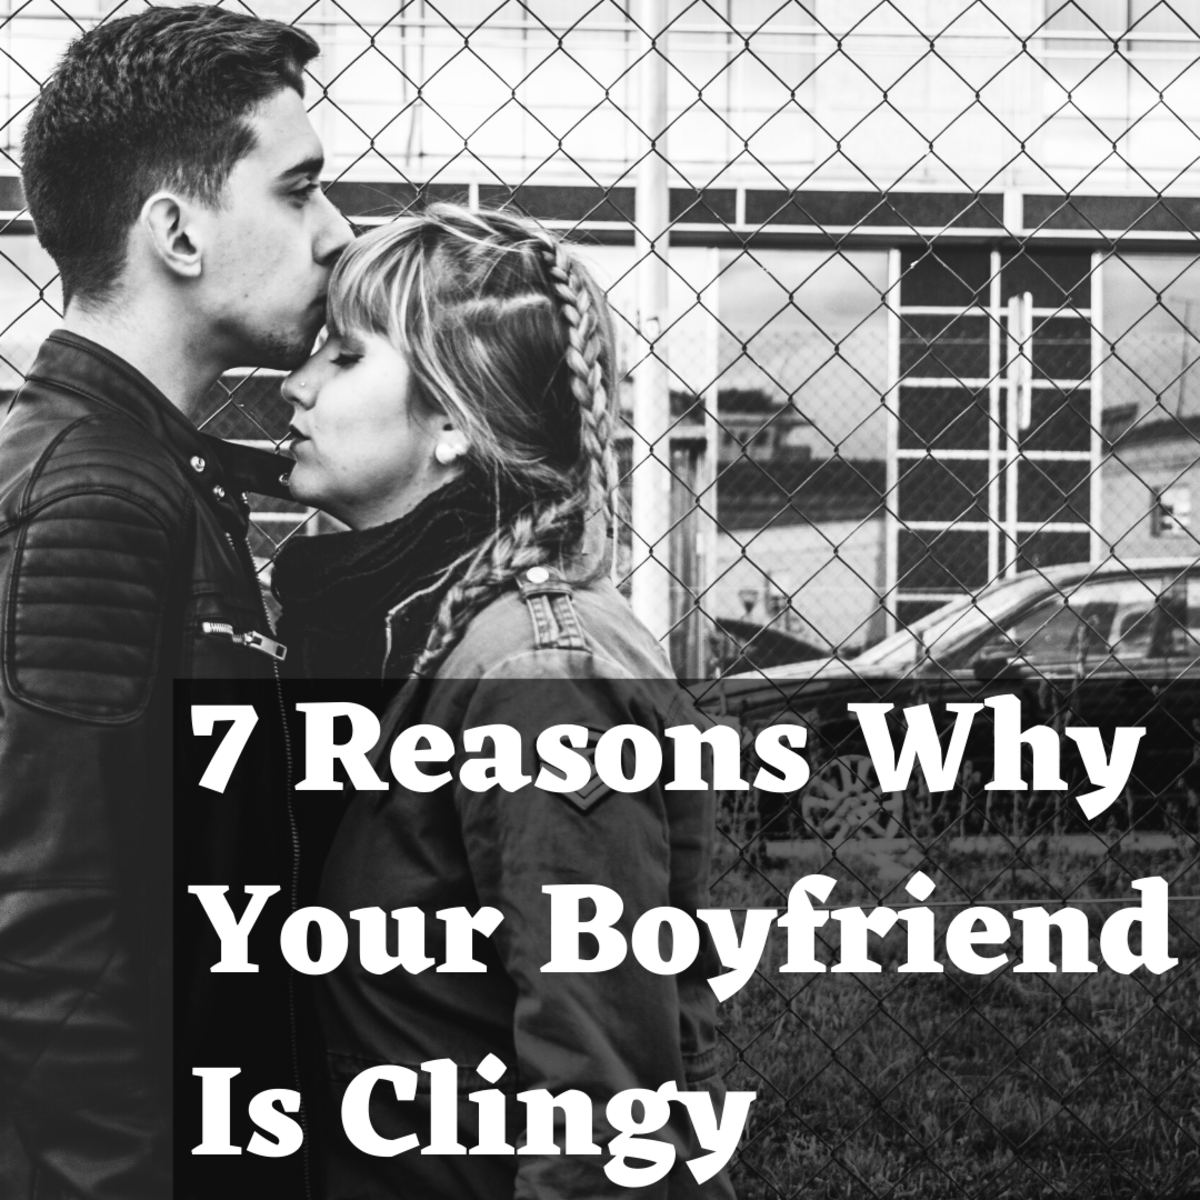 Why Is My Boyfriend so Clingy? 7 Reasons Your Man Is Suffocating You